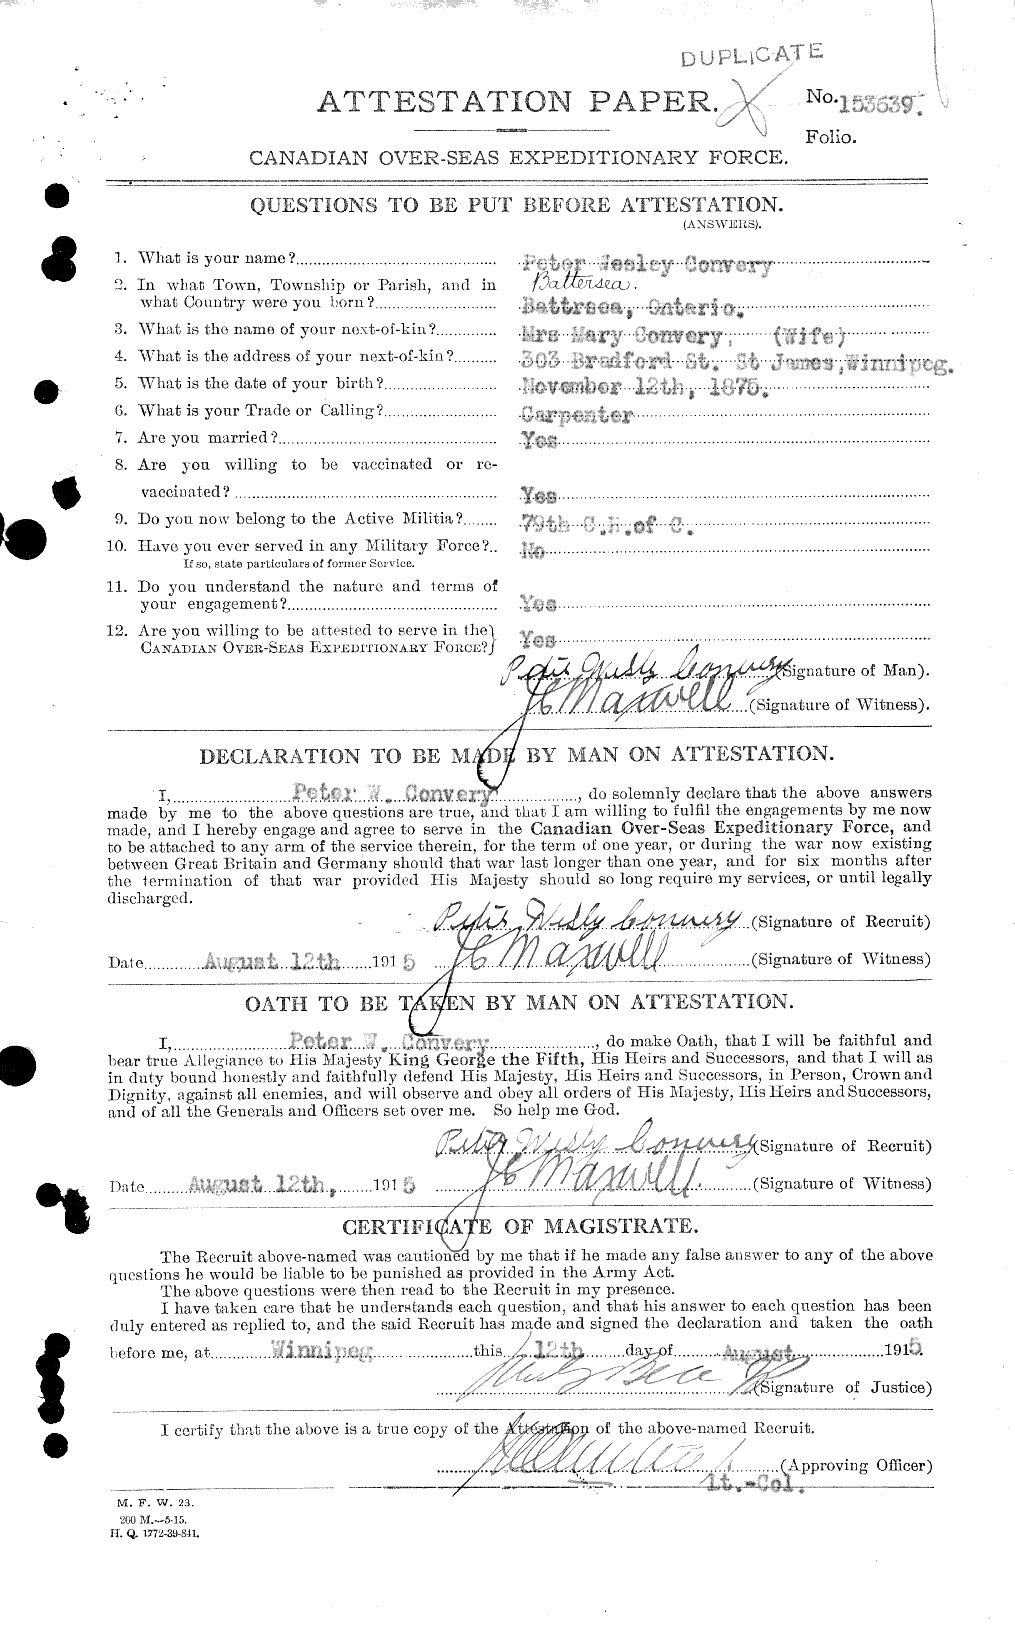 Personnel Records of the First World War - CEF 034786a